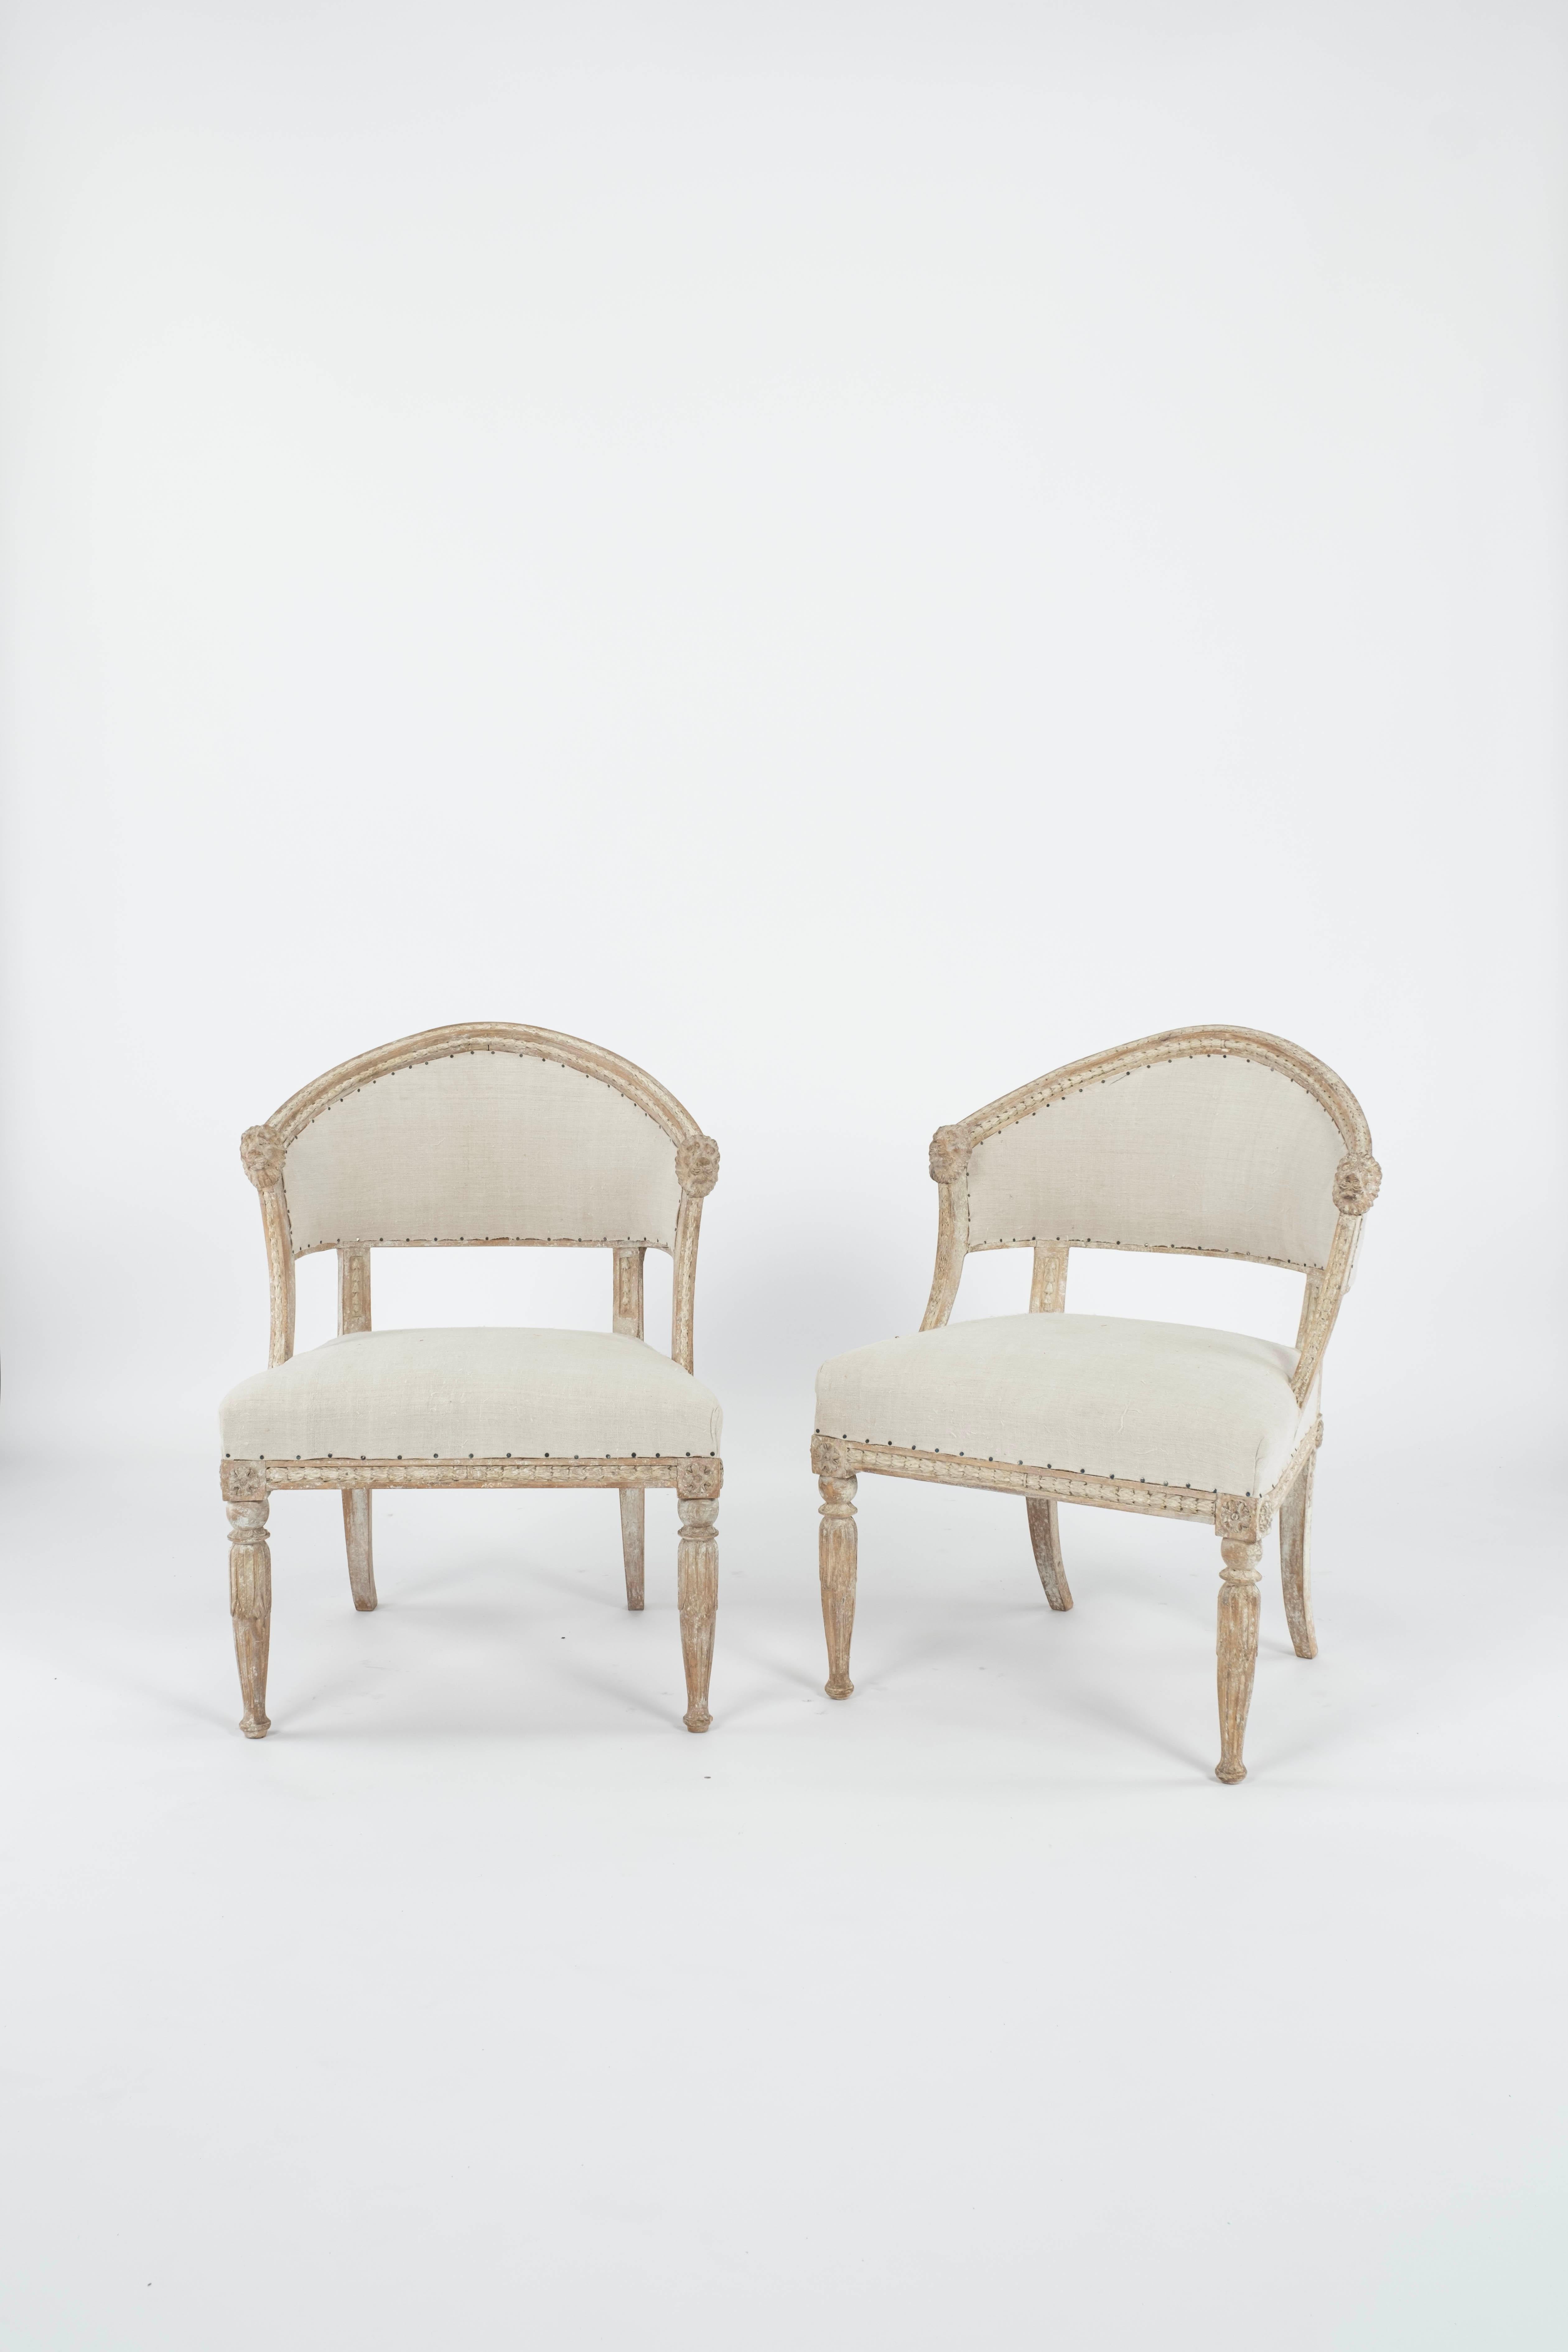 Pair of 19th C. Swedish Gustavian Barrel Back Chairs In Good Condition For Sale In Houston, TX